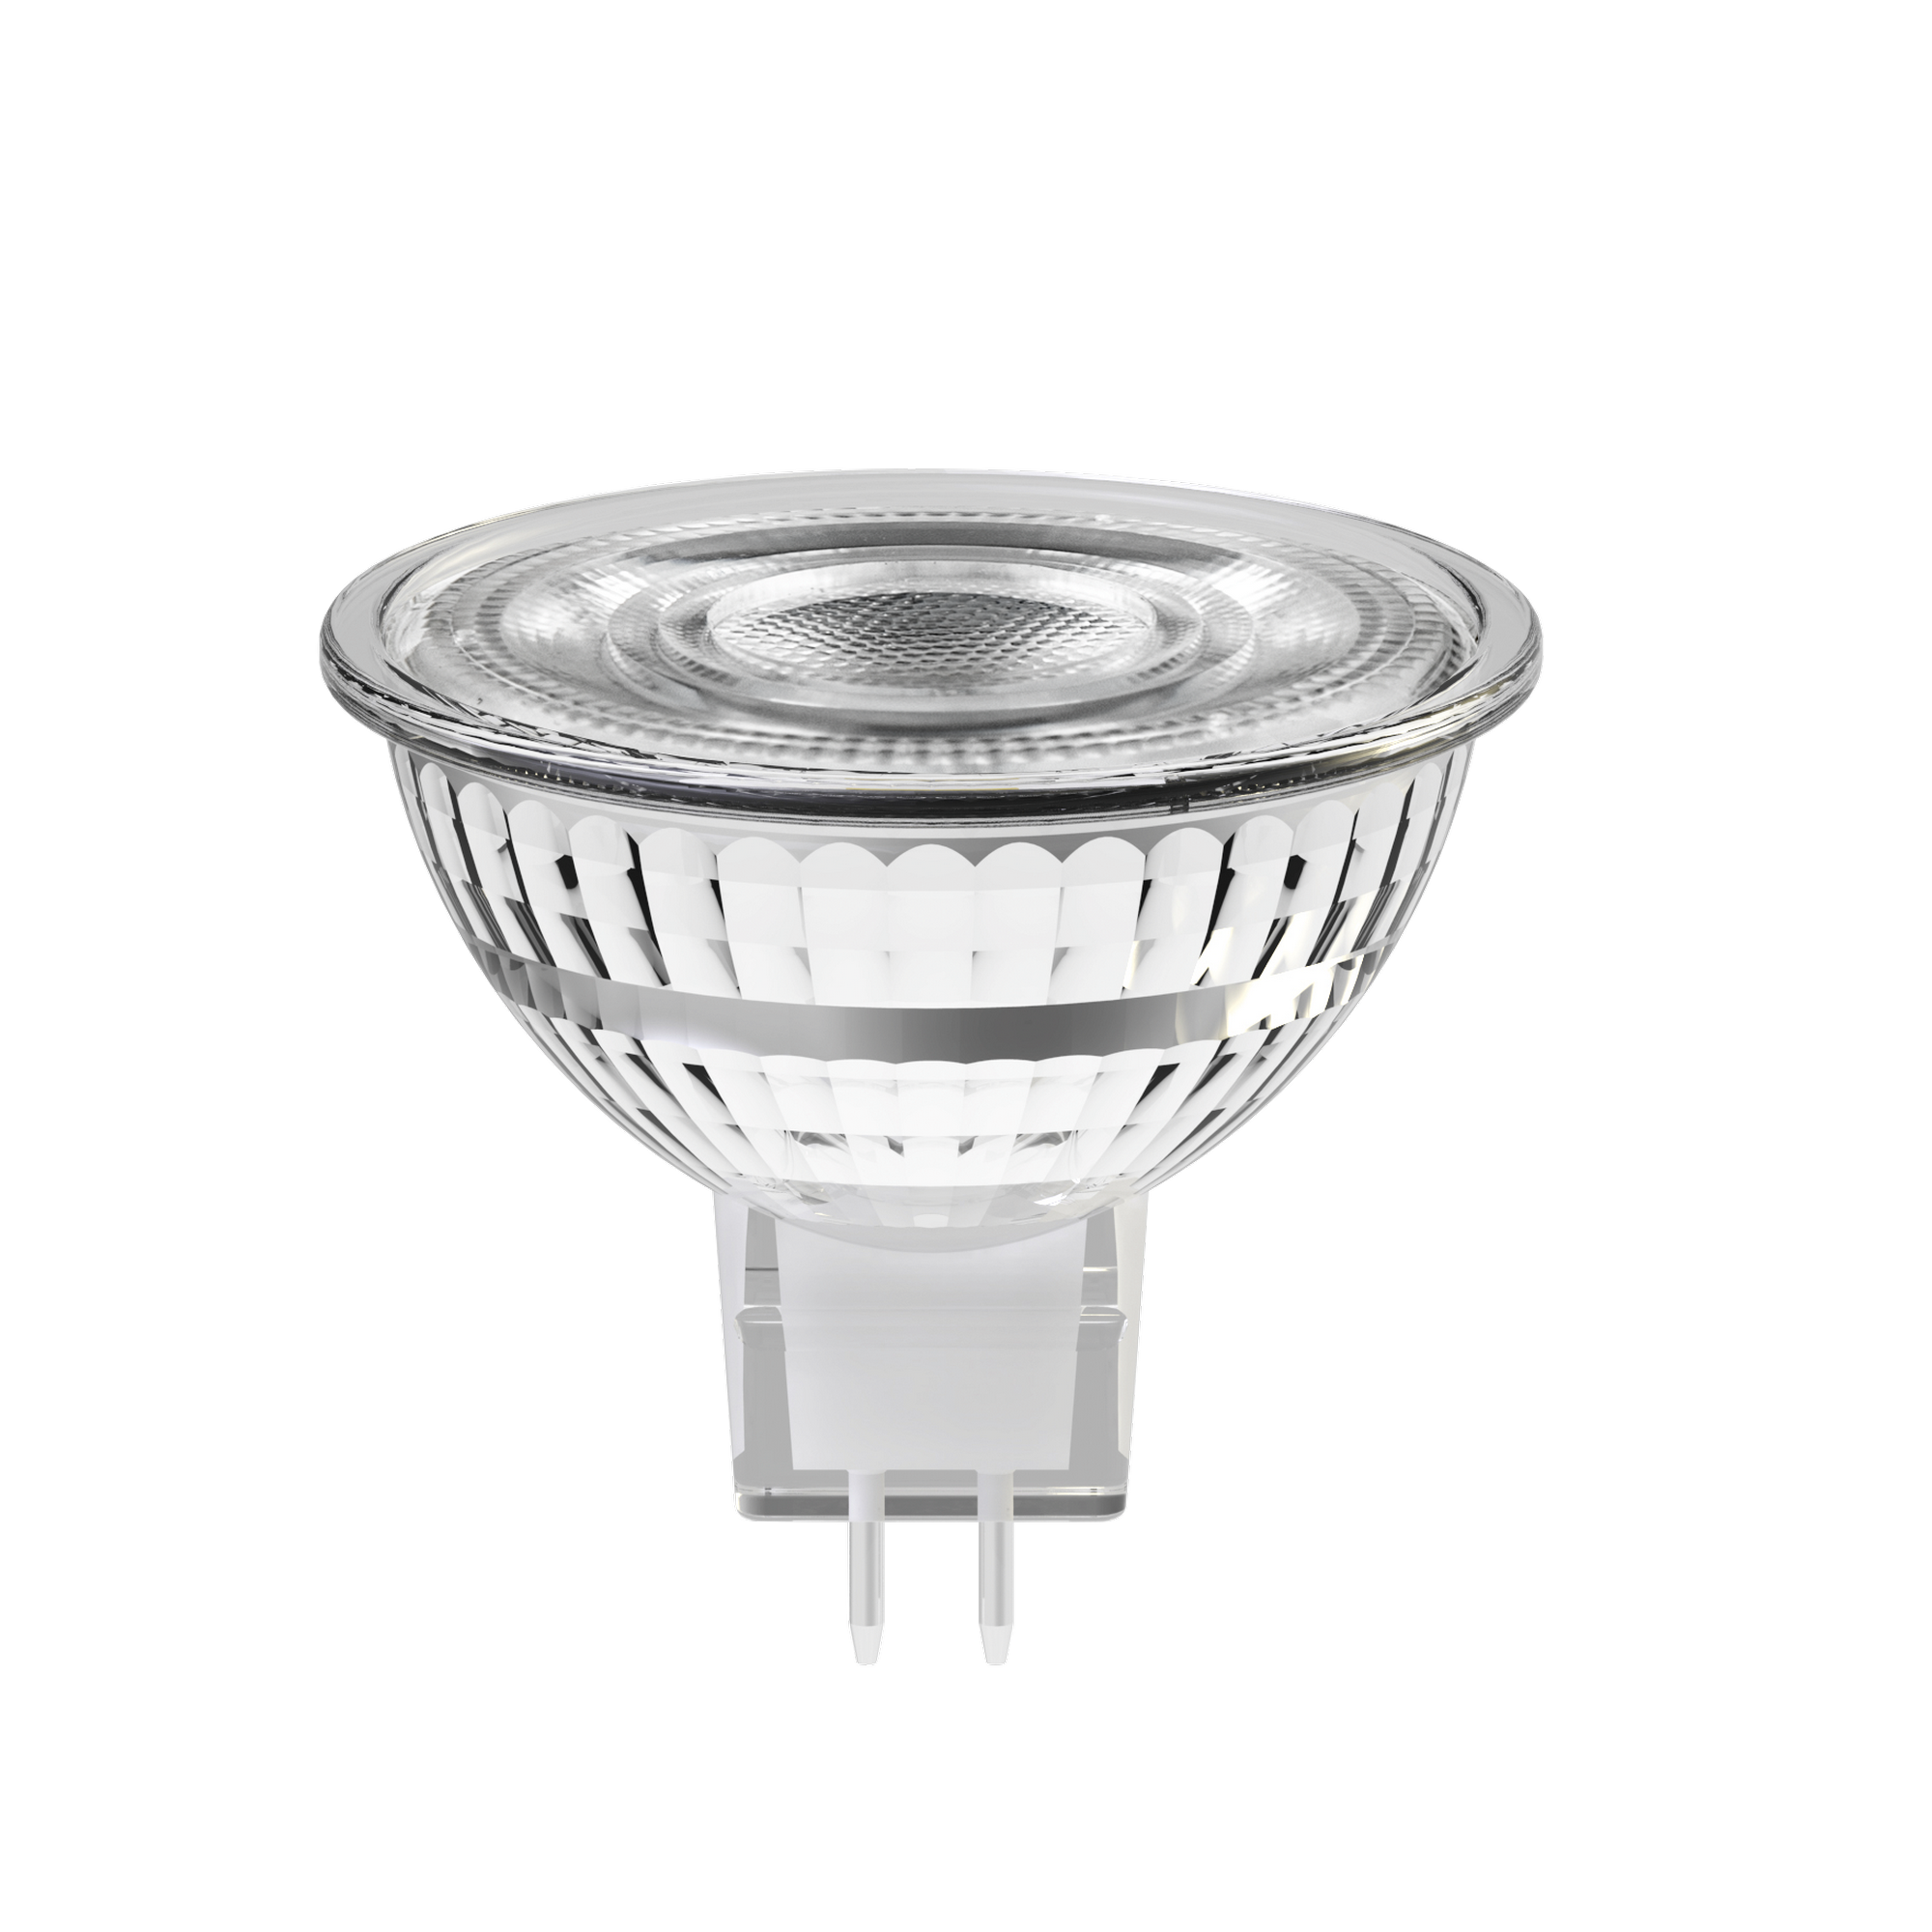 LED-Reflektor GU5.3 2,7 W 345 lm + product picture